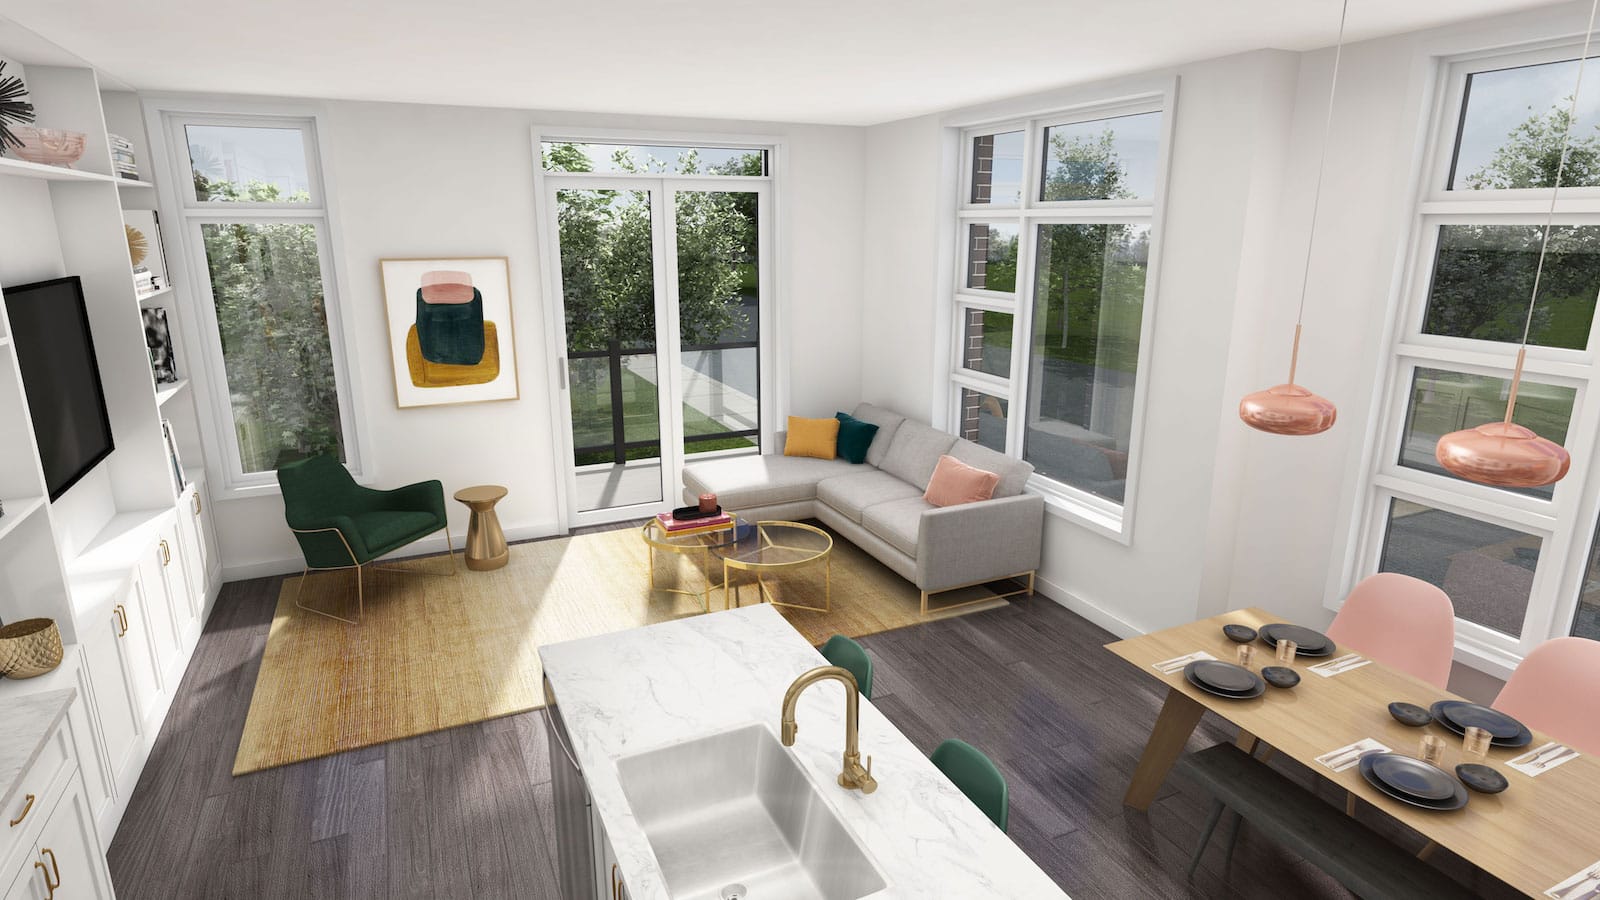 NuTowns Interior Rendering of Living Room Area